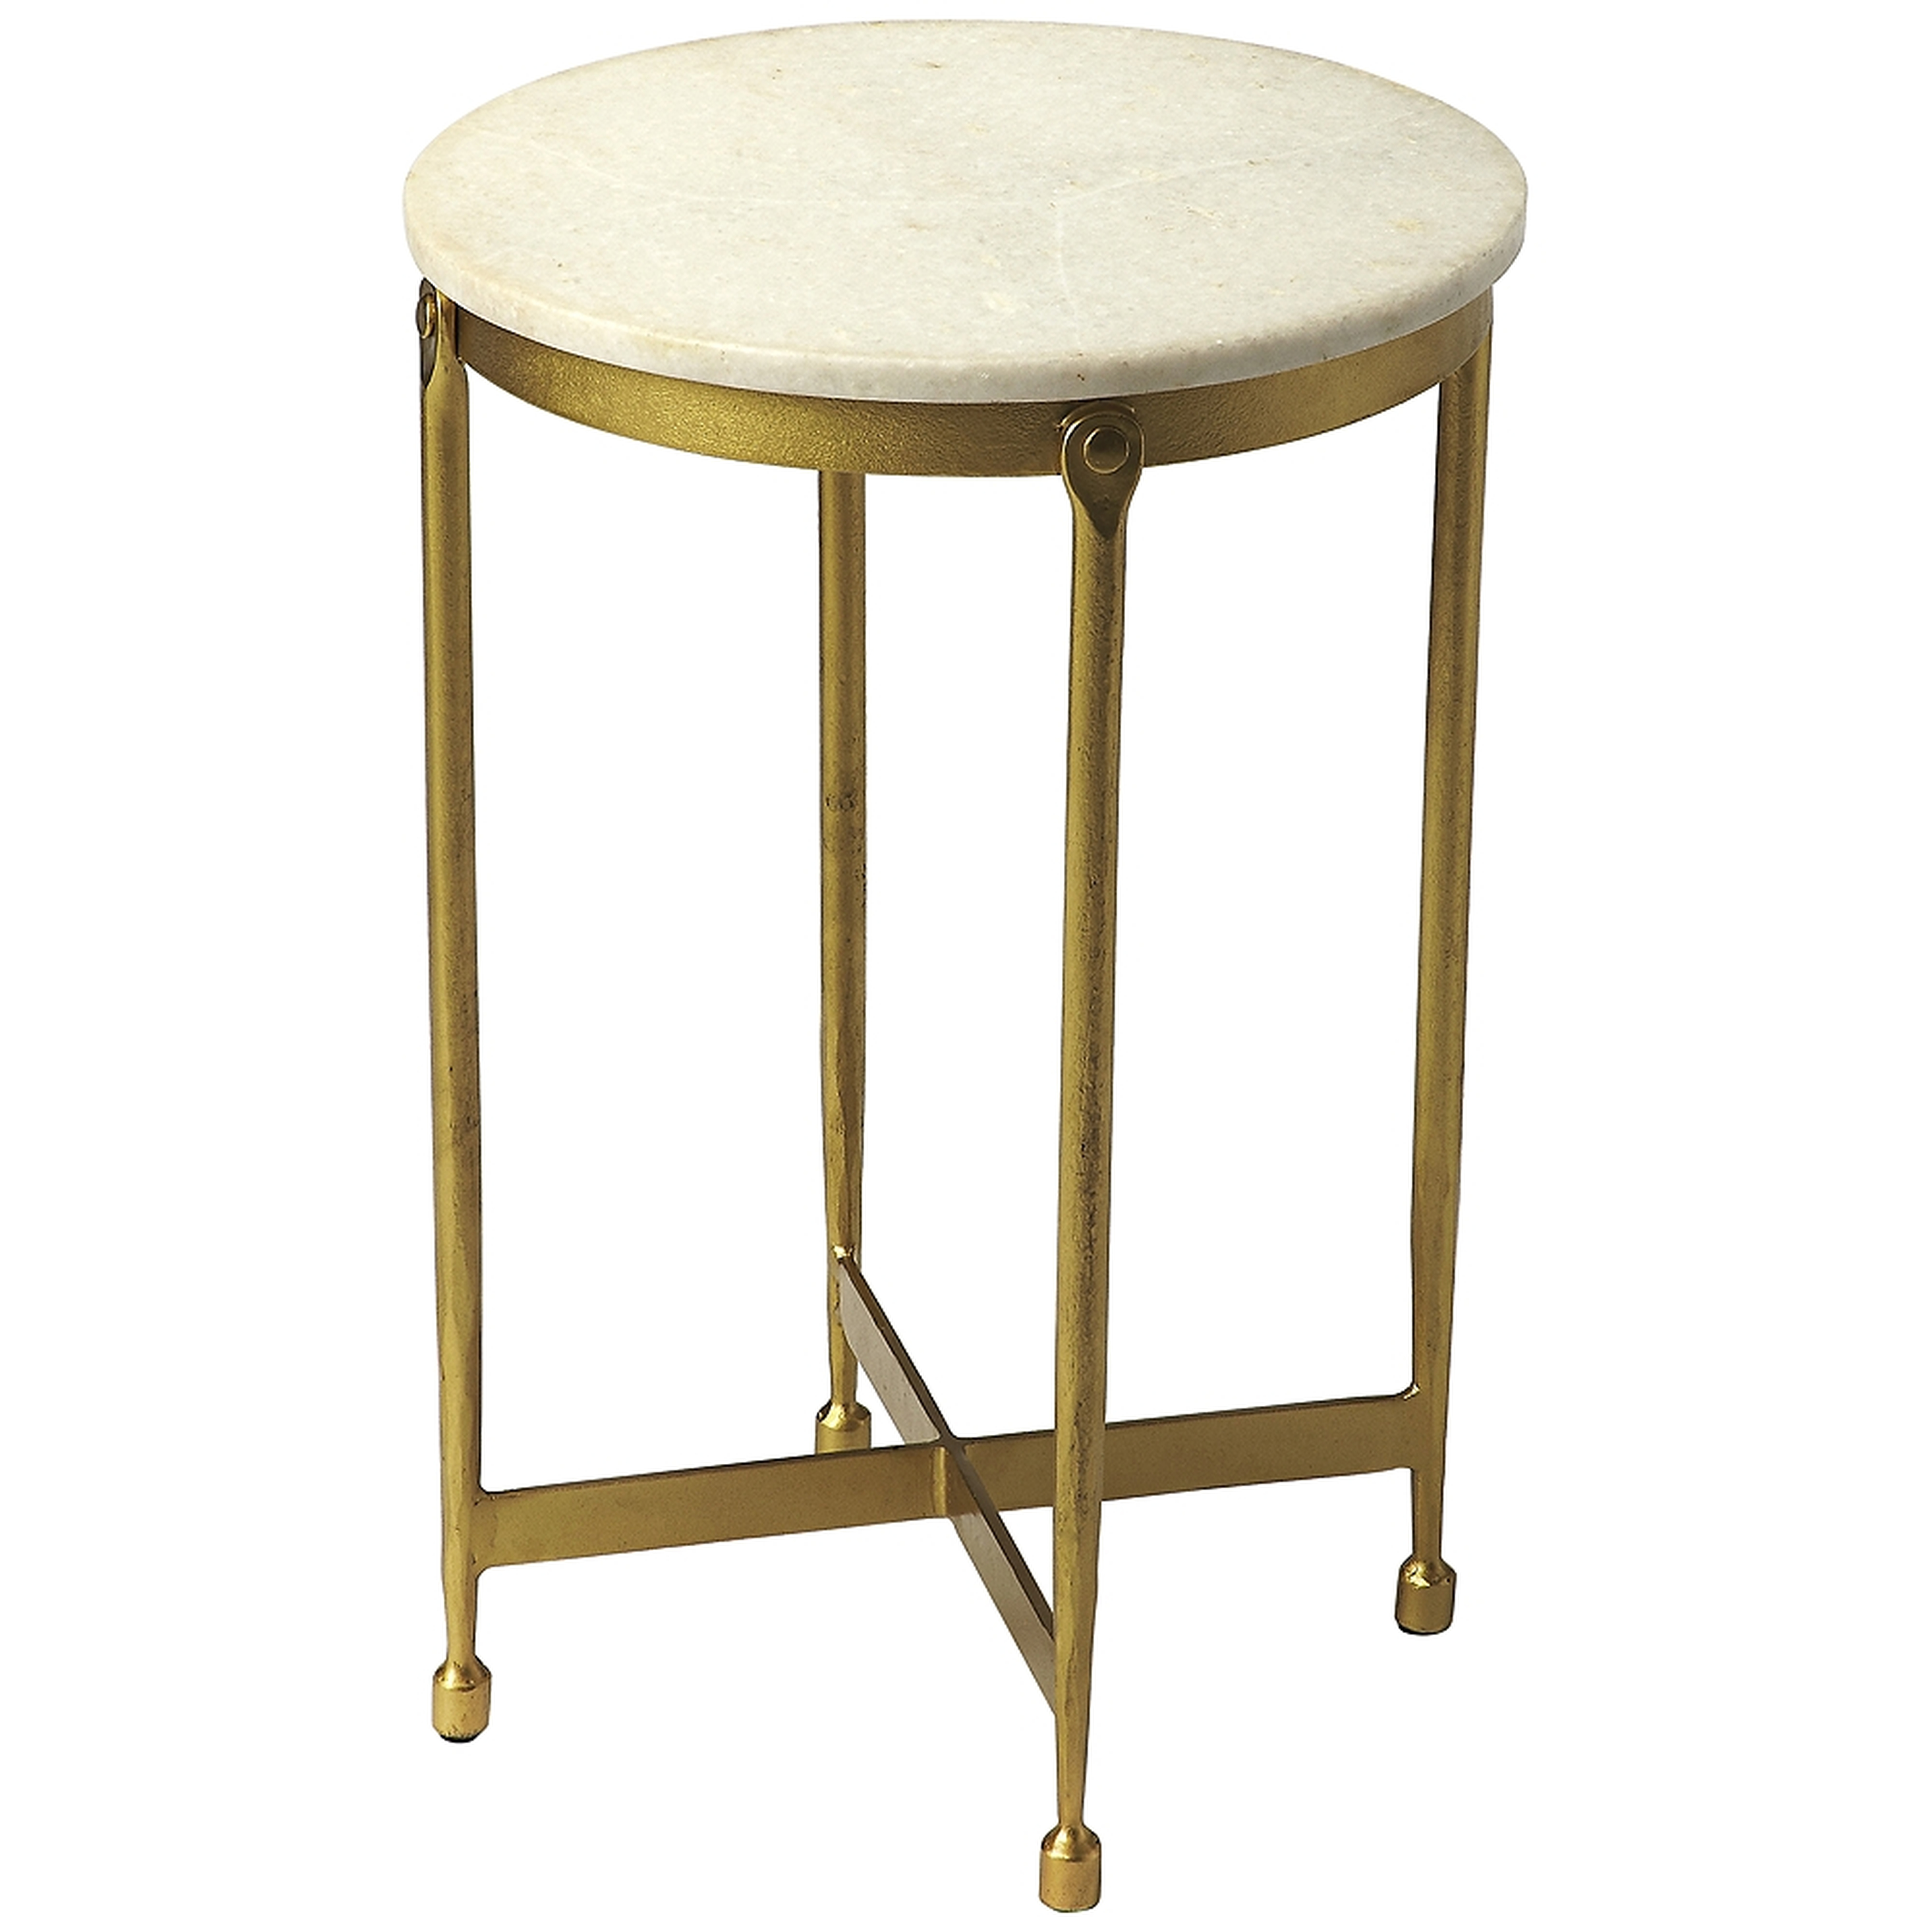 Butler Claypool 13 1/2"W Antique Brass and Marble End Table - Style # 77J83 - Lamps Plus